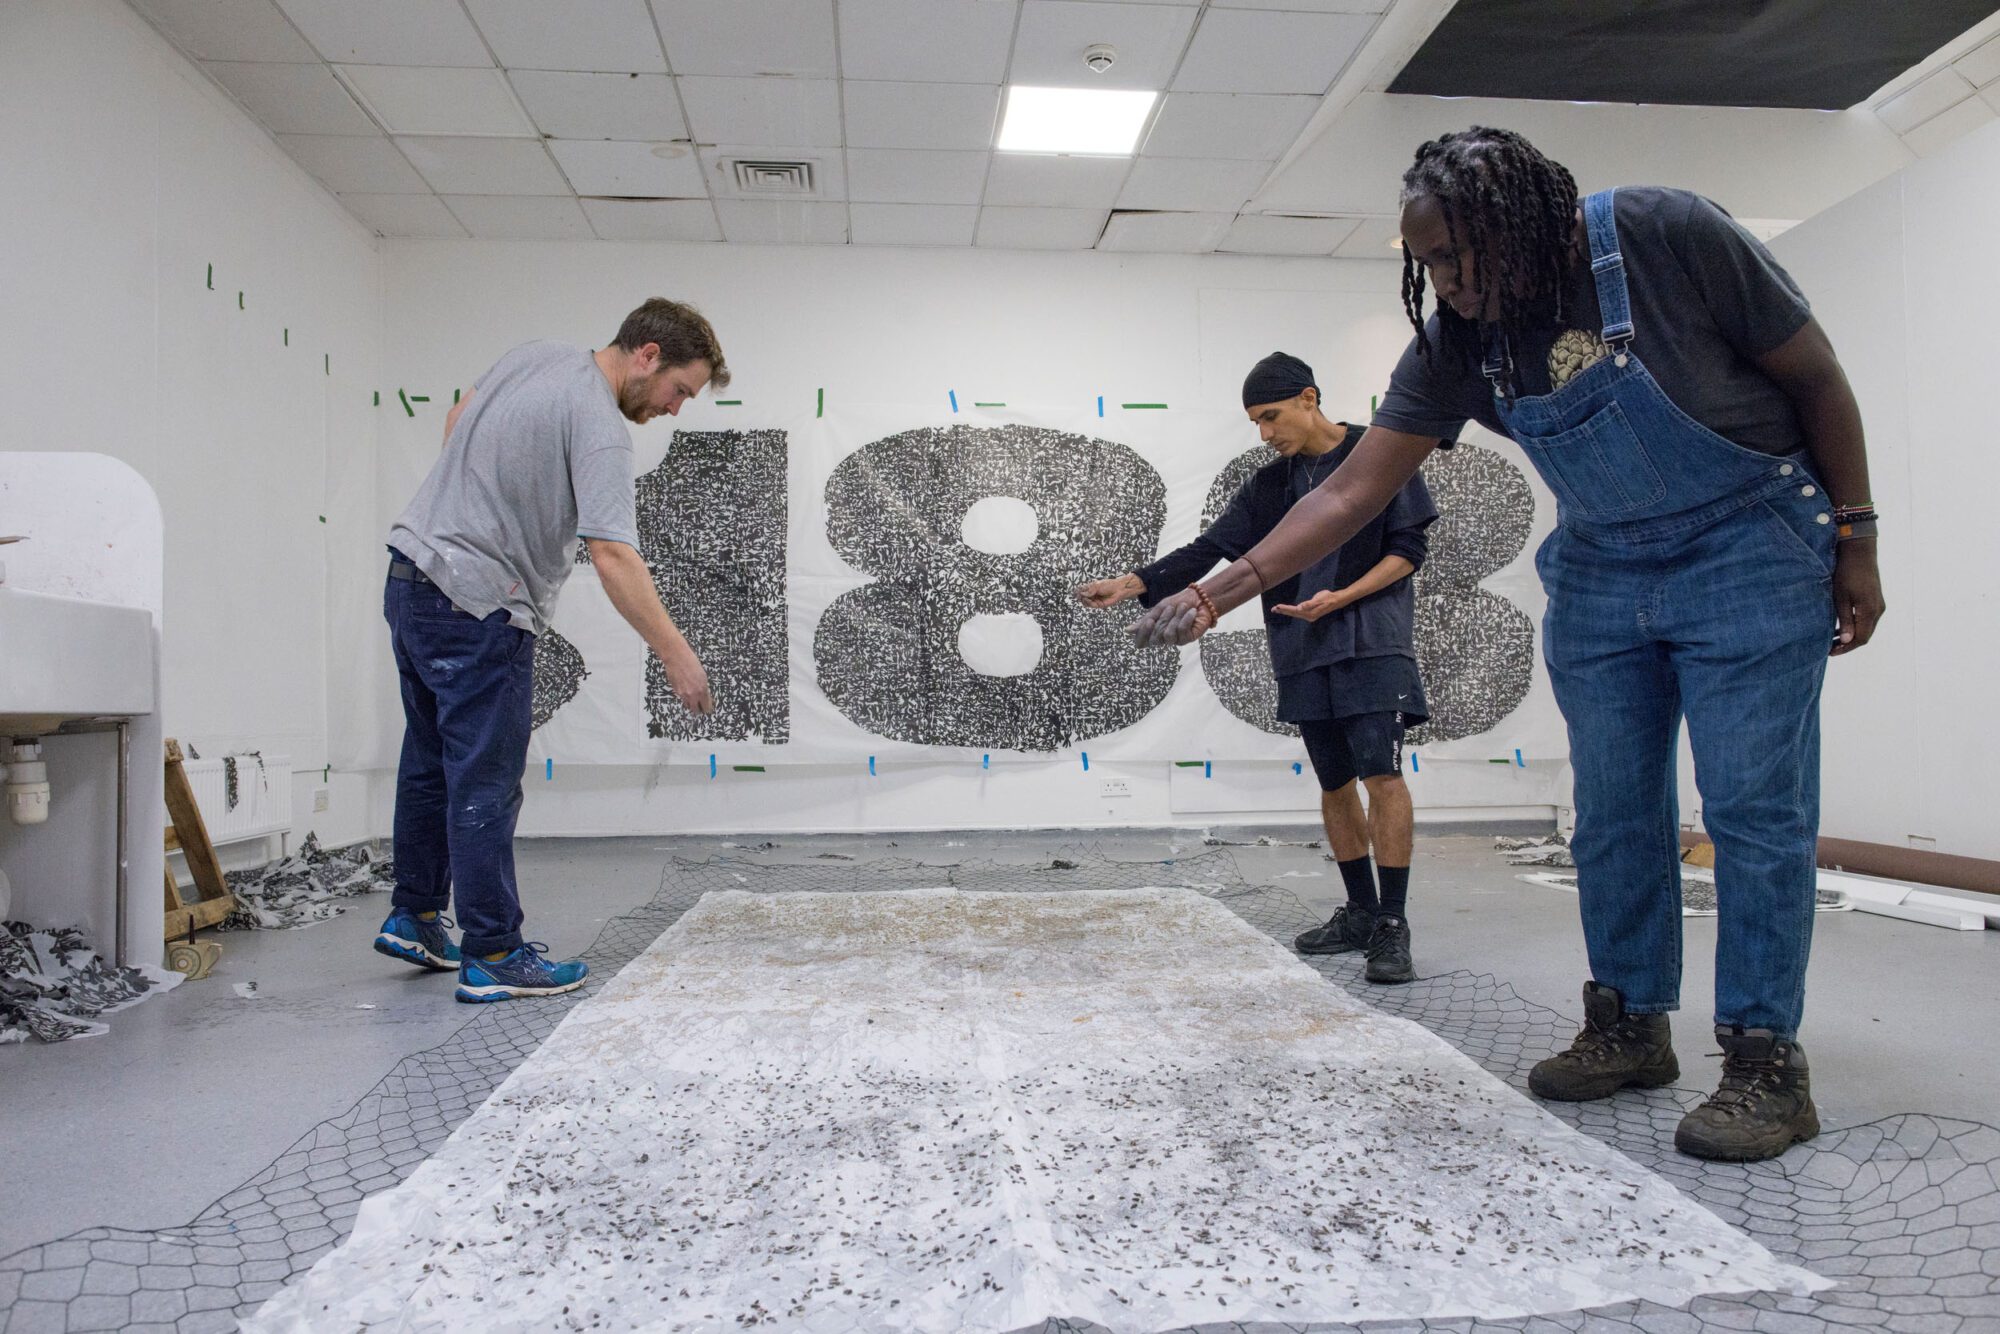 IN a white room three people stand over a white sheet scattering seeds and dust. In the background hands a white banner with giant numbers 1 and 8 printed with a grey pattern